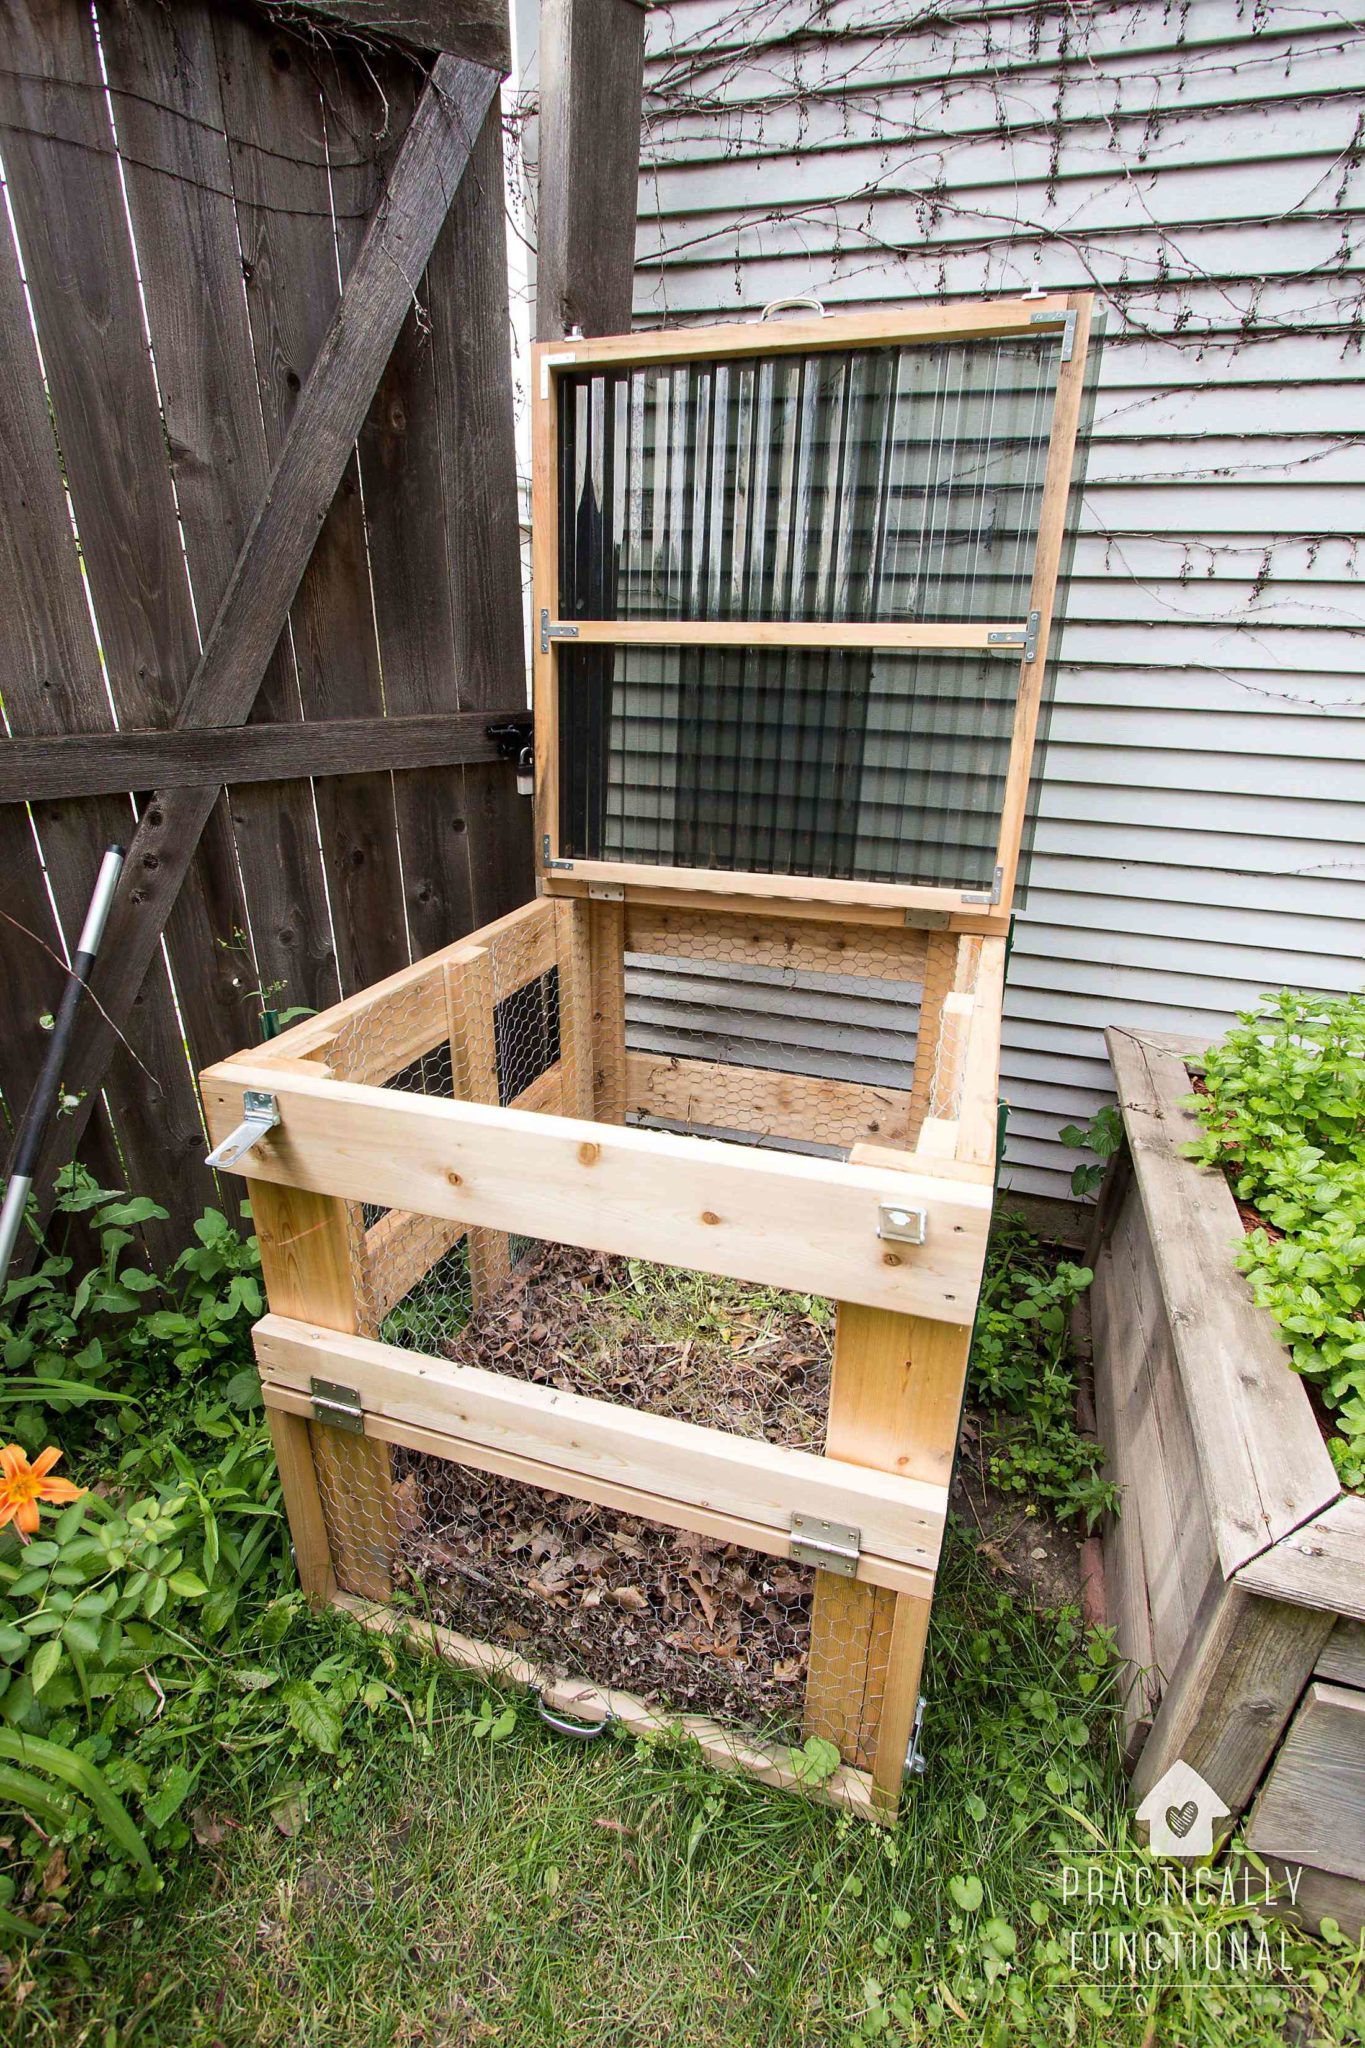 10 Compost Bins to Reduce Waste